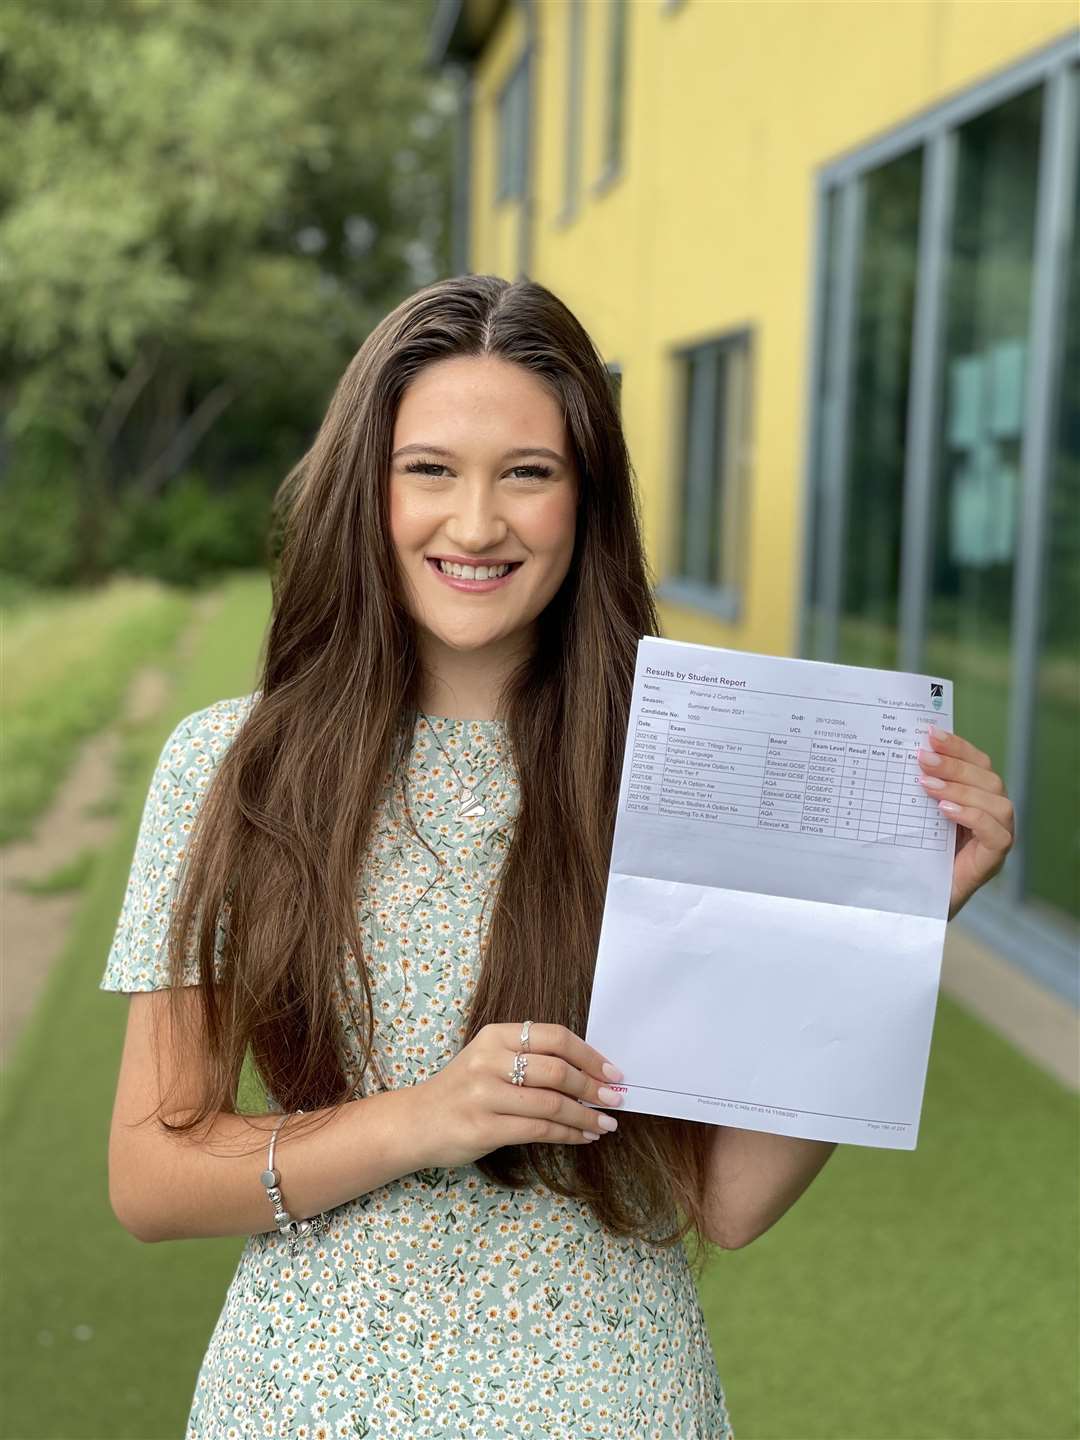 Rhianna, who goes to Leigh Academy, got 9s in English language, history, and English literature, Distinction* in Performing Arts Acting, 8 in Ethics and 77 Combined Science